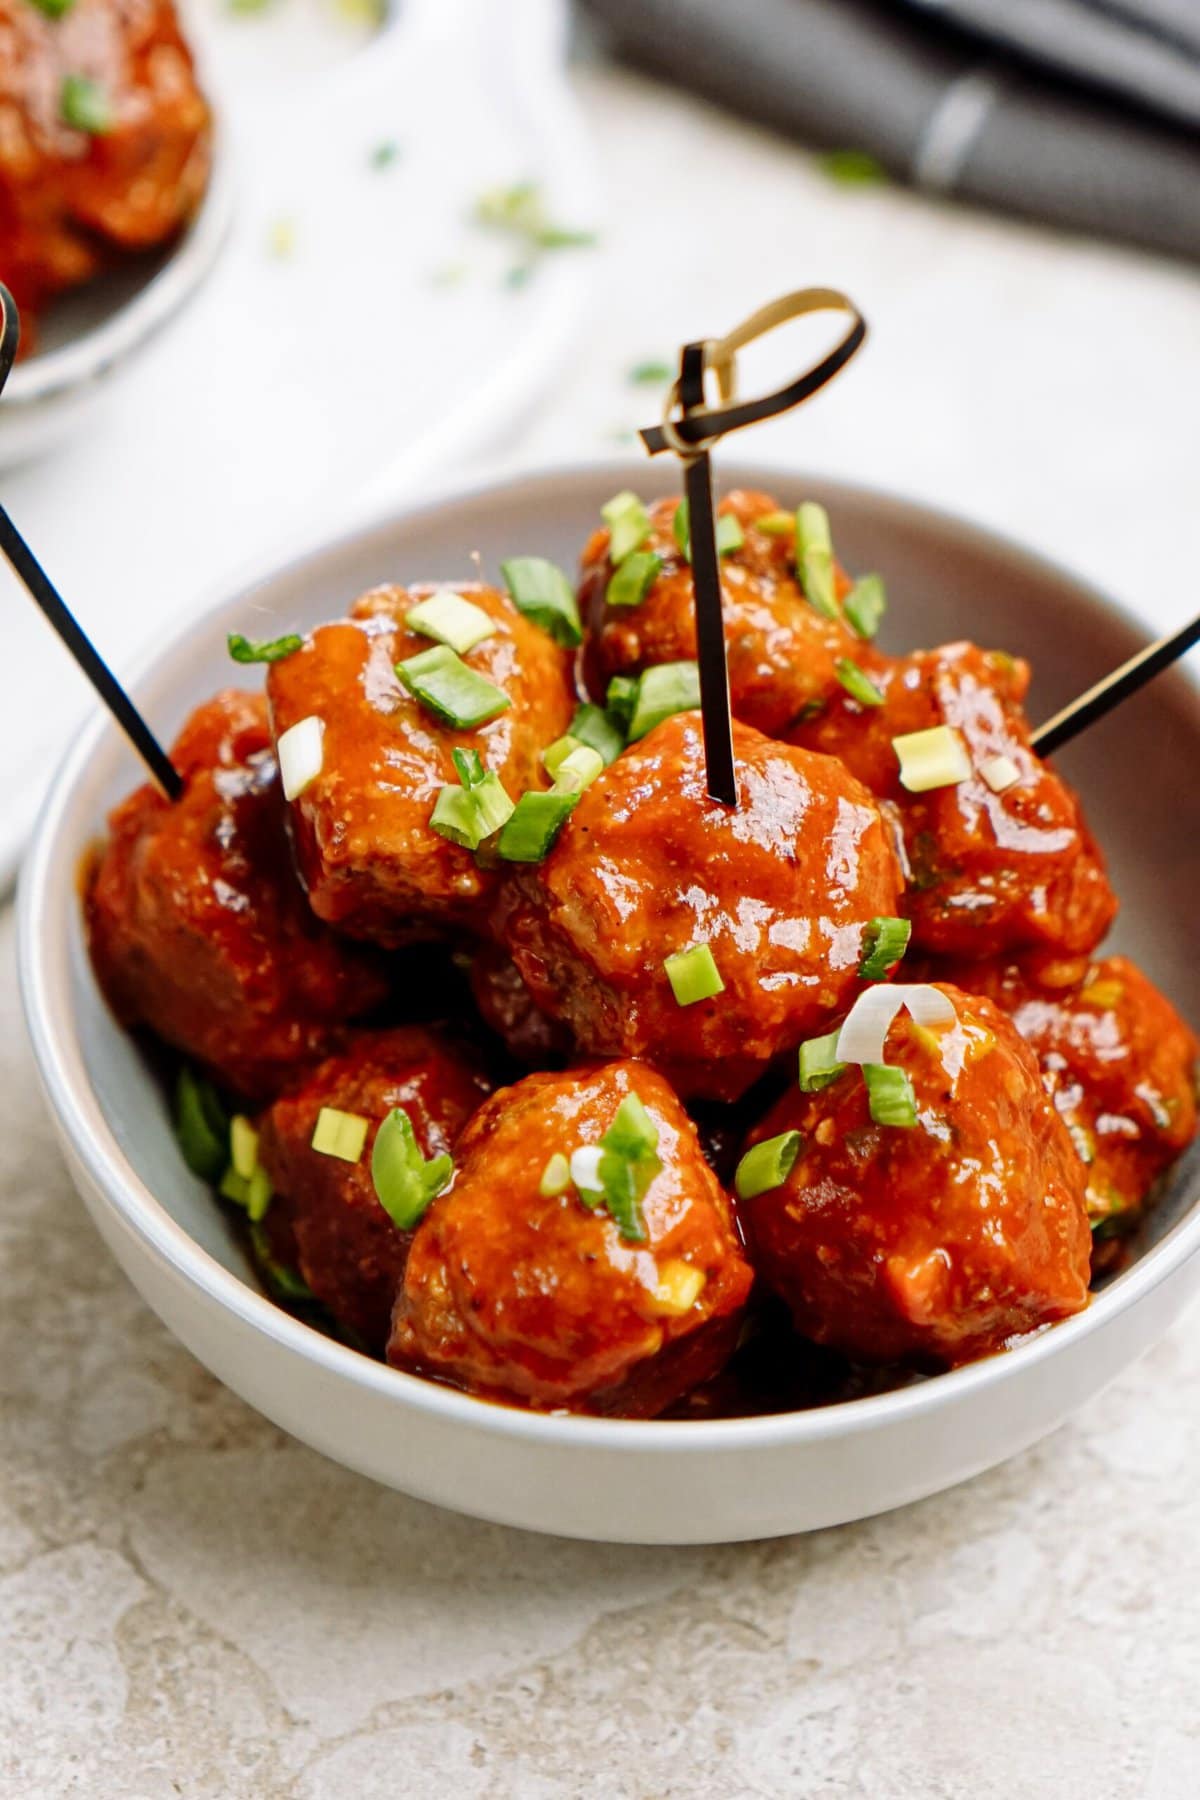 A bowl of glazed meatballs garnished with green onions.